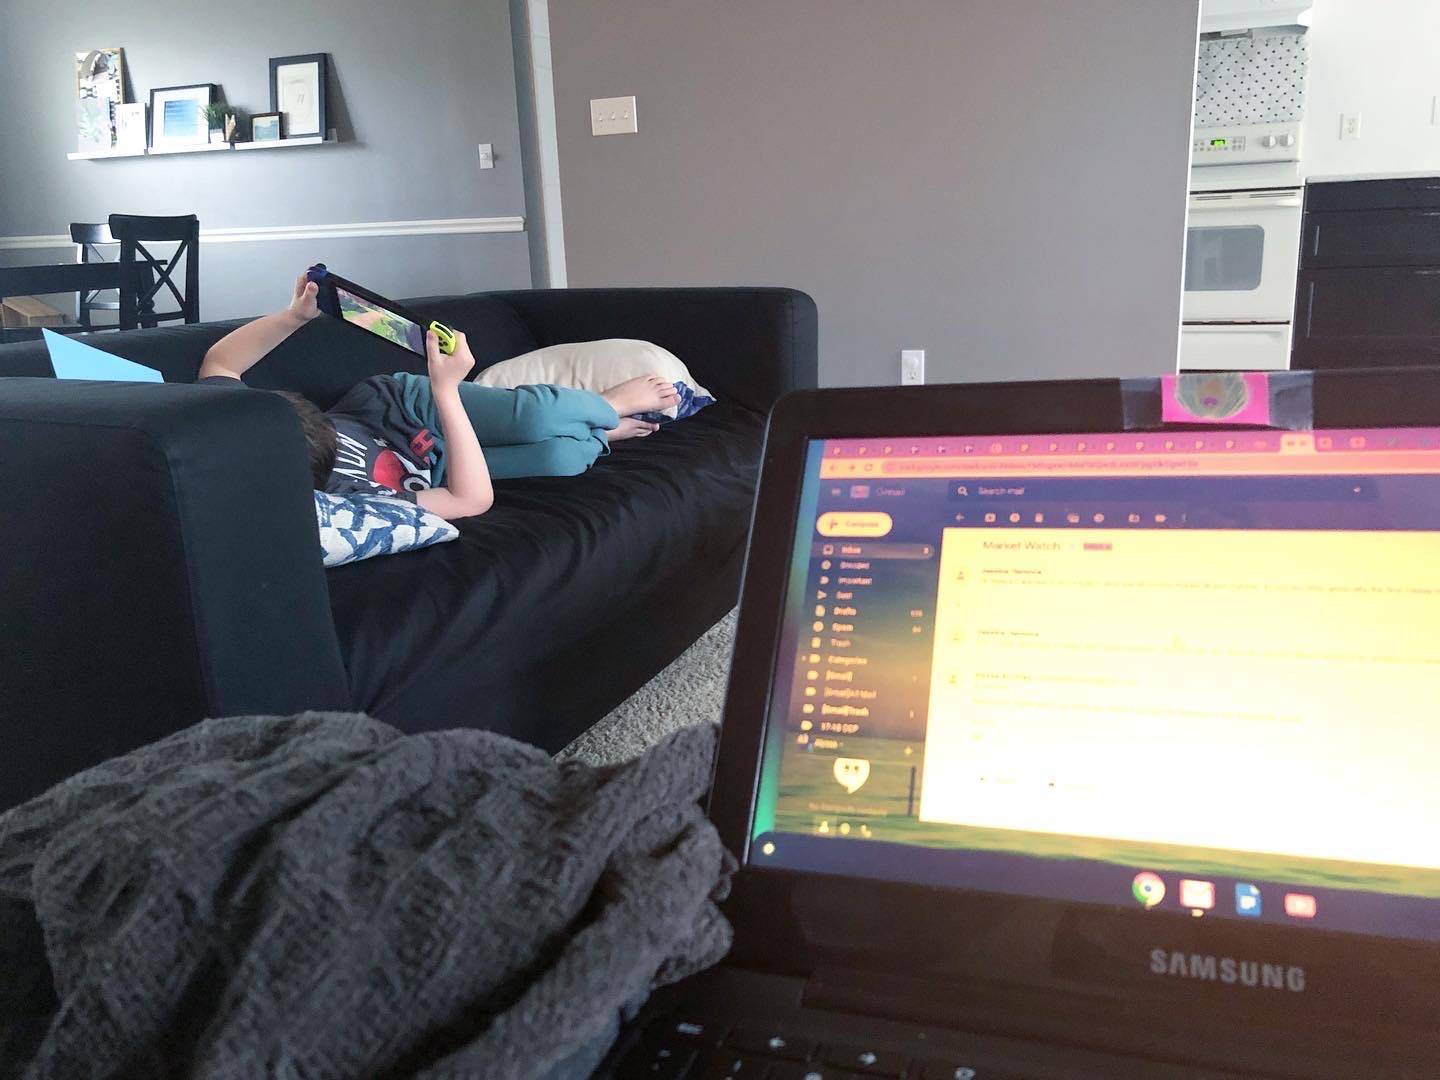 A child lays on a black couch with a Nintendo Switch. There is an open laptop with a screen too blurry to read in the lap of the photographer with a gray waffled blanket. Photo by Alyssa Buckley.